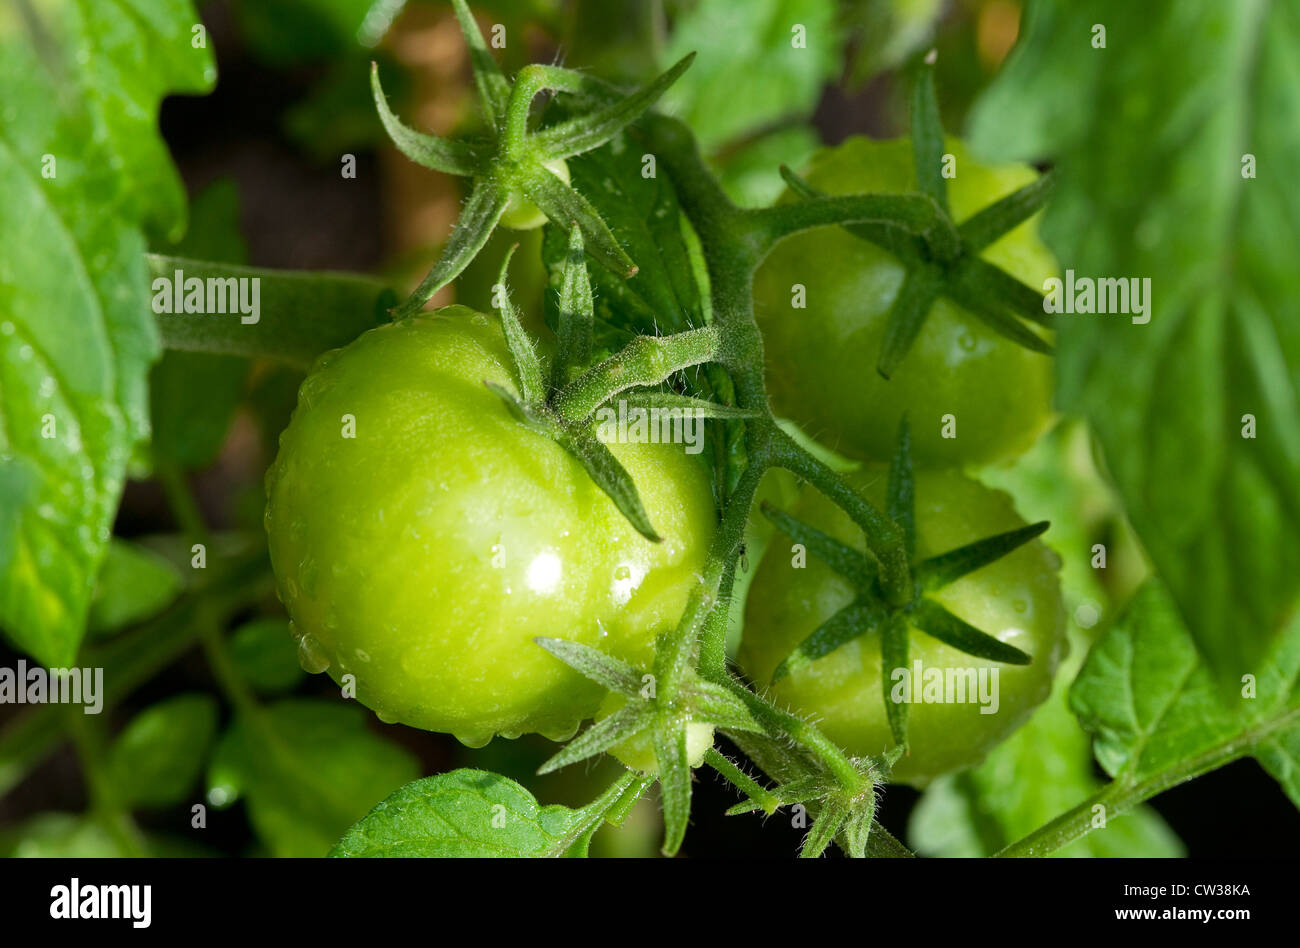 green tomatoes growing in english garden Stock Photo